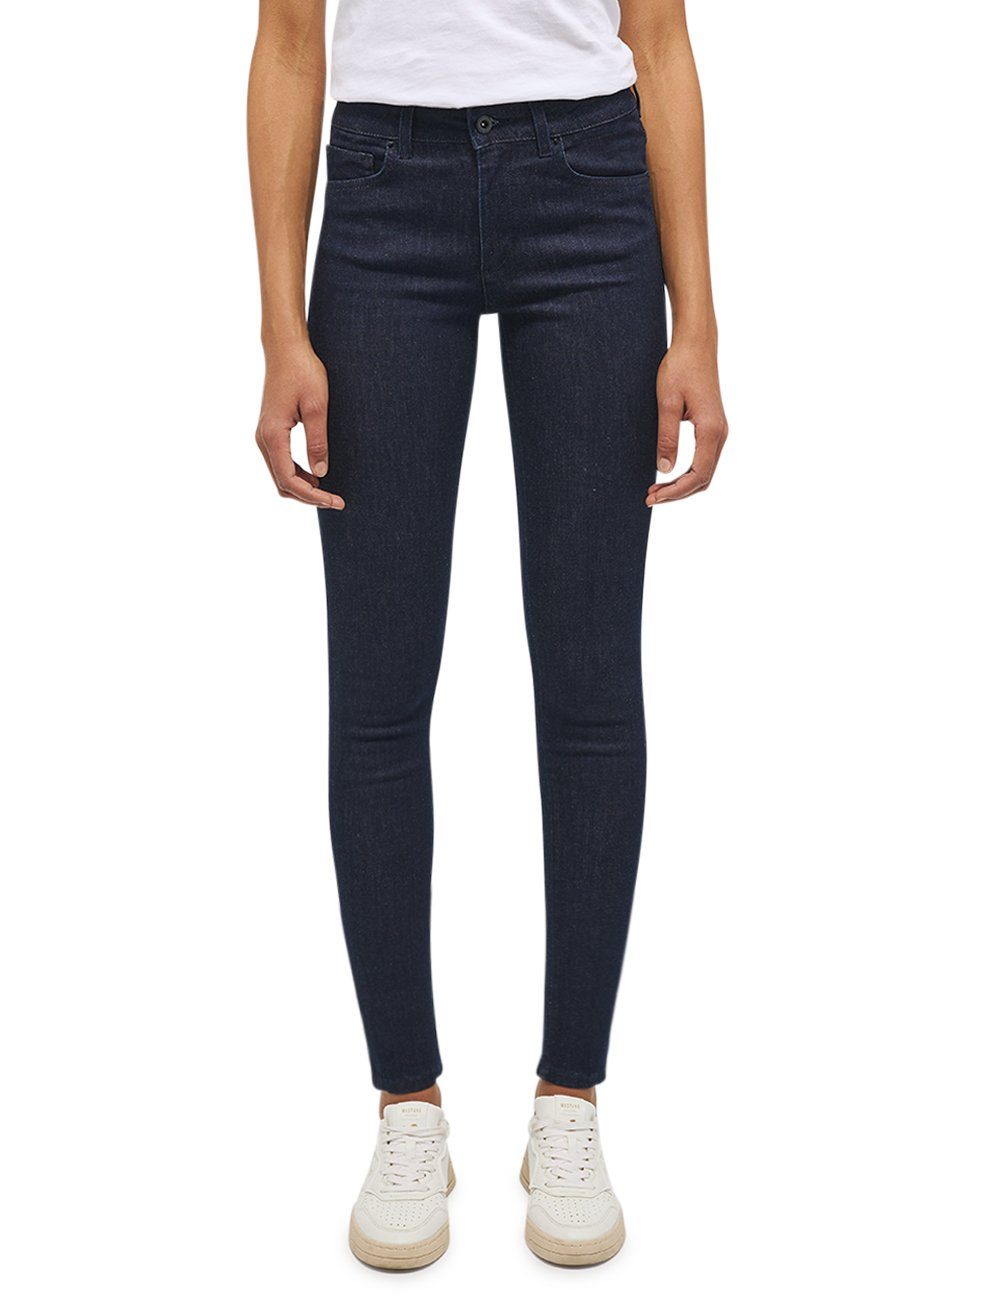 MUSTANG Skinny-fit-Jeans SHELBY mit Stretch